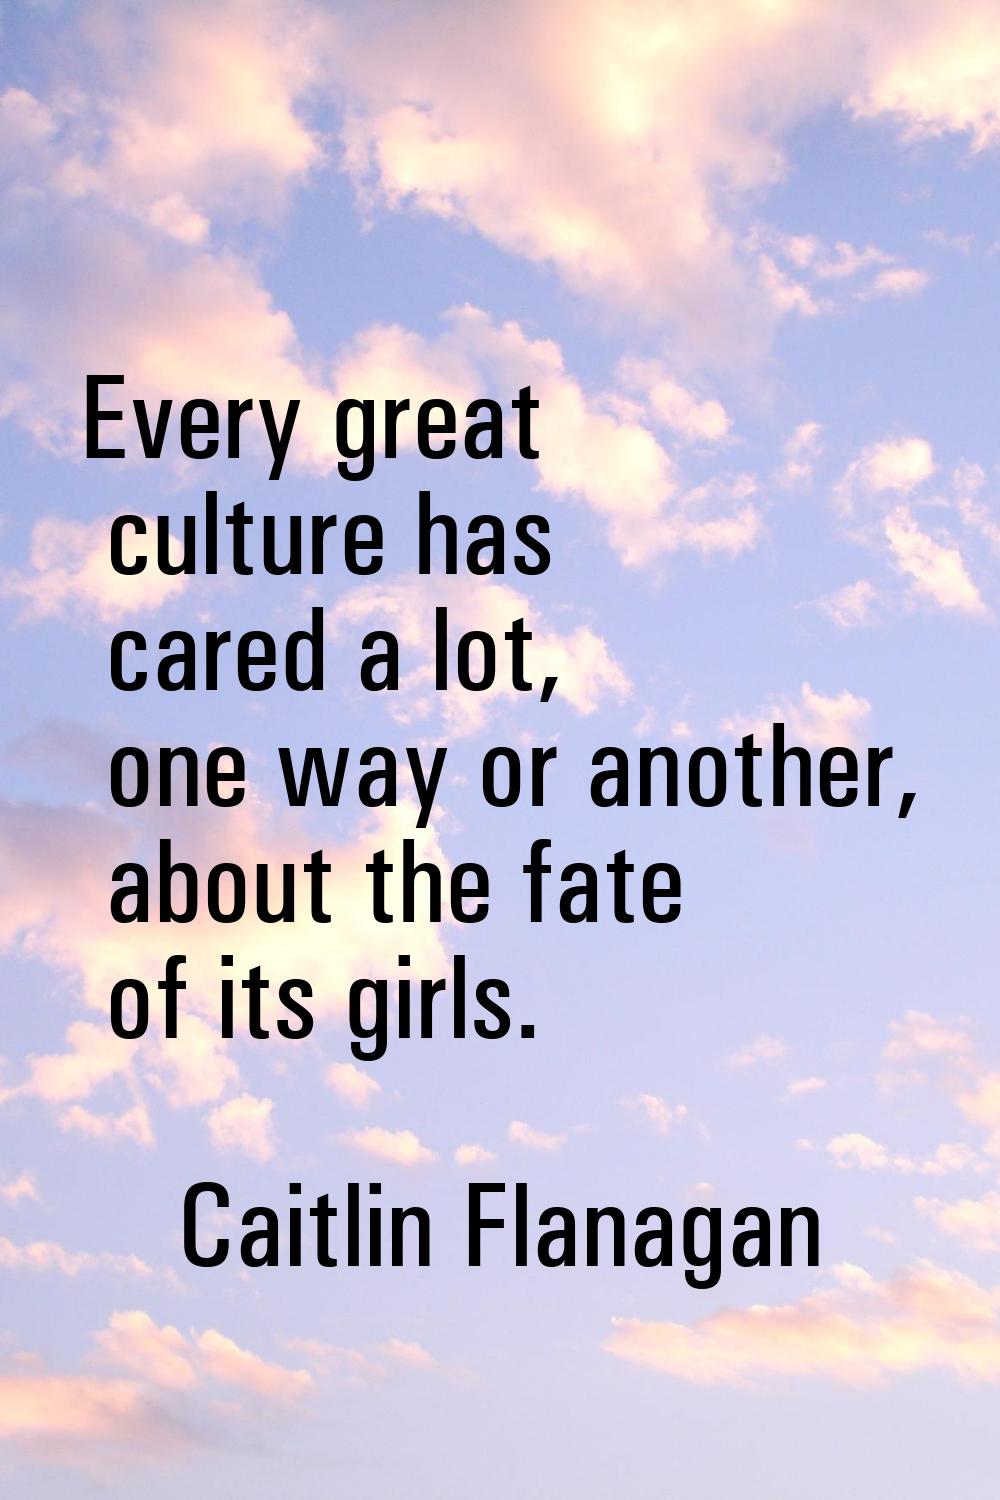 Every great culture has cared a lot, one way or another, about the fate of its girls.